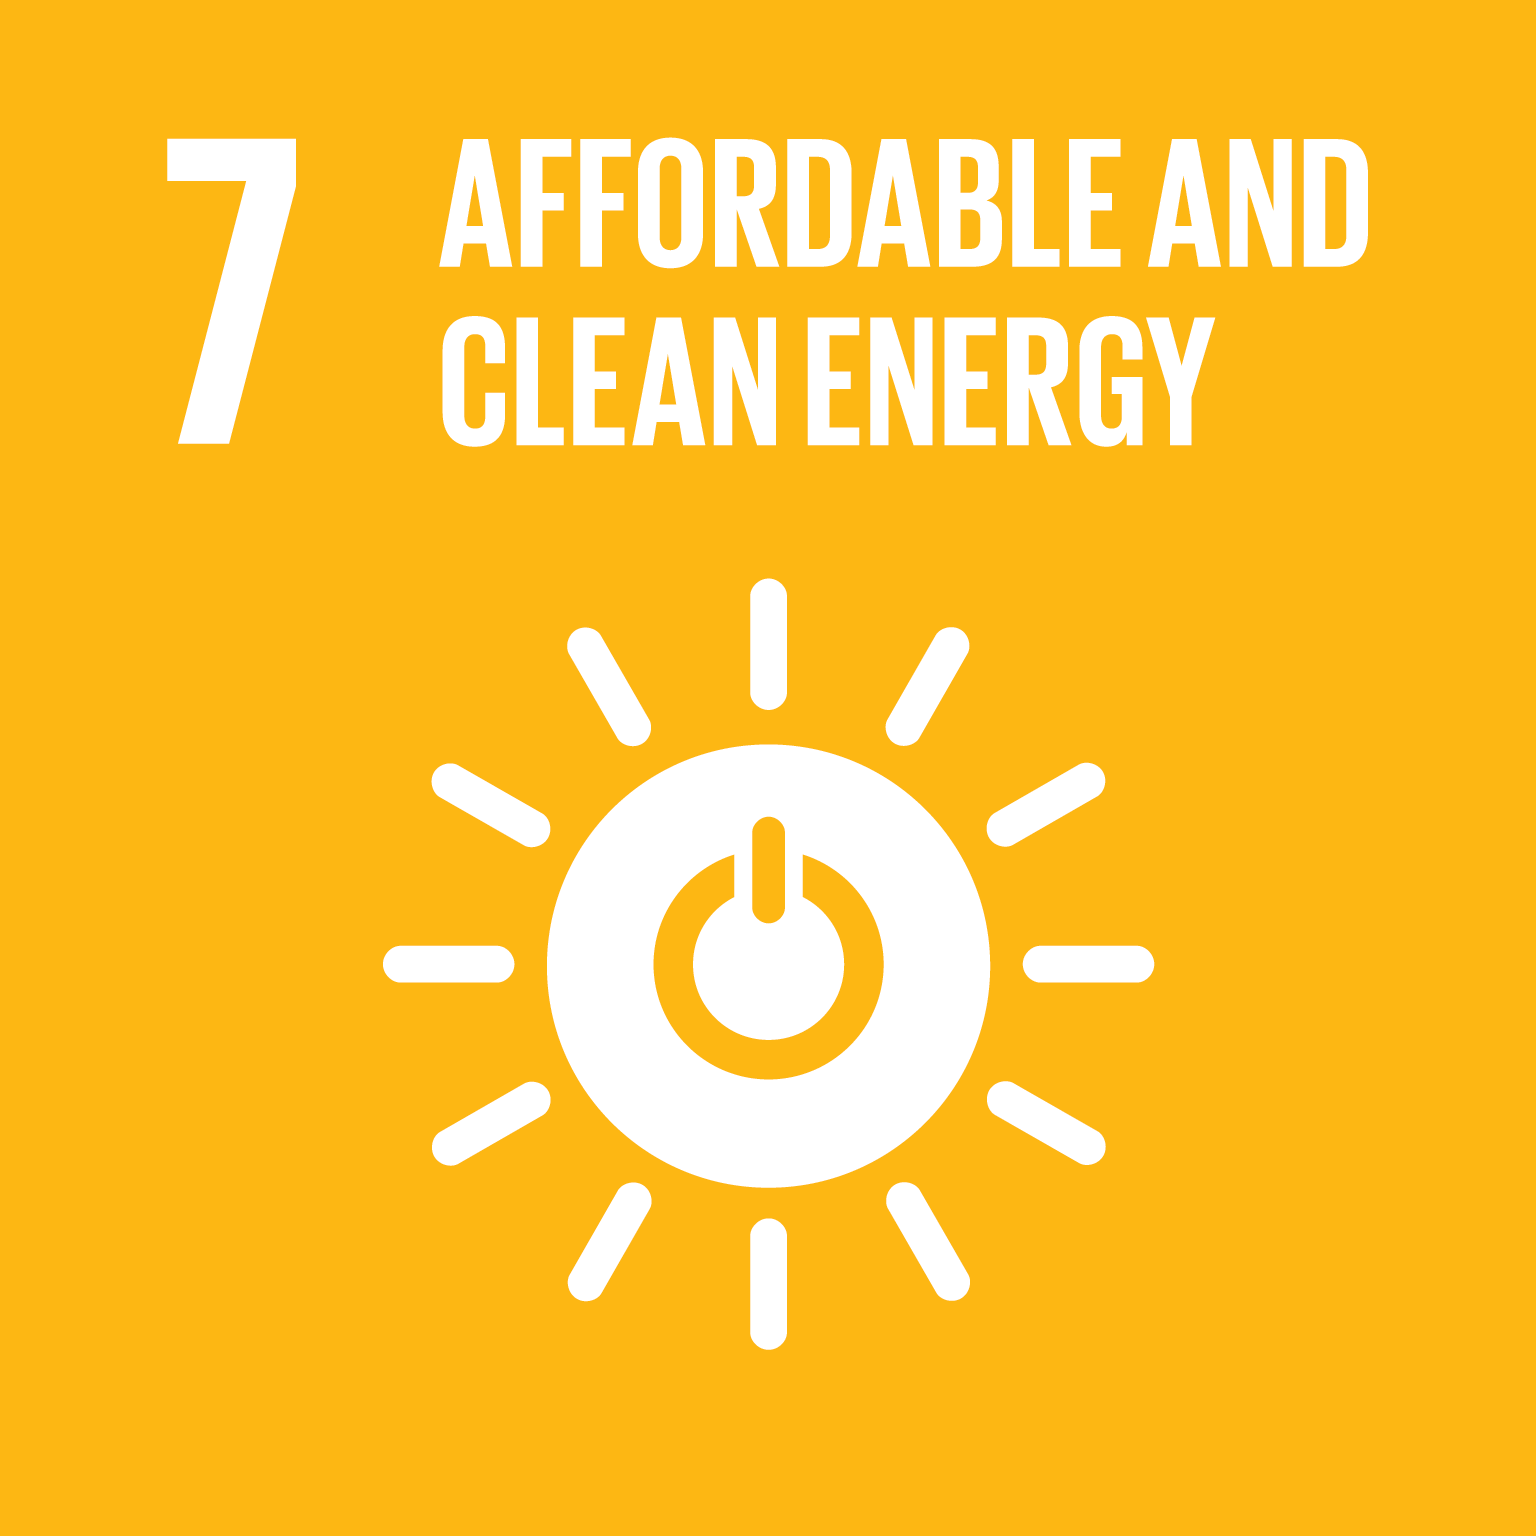 SDG - 7: Affordable and clean energy